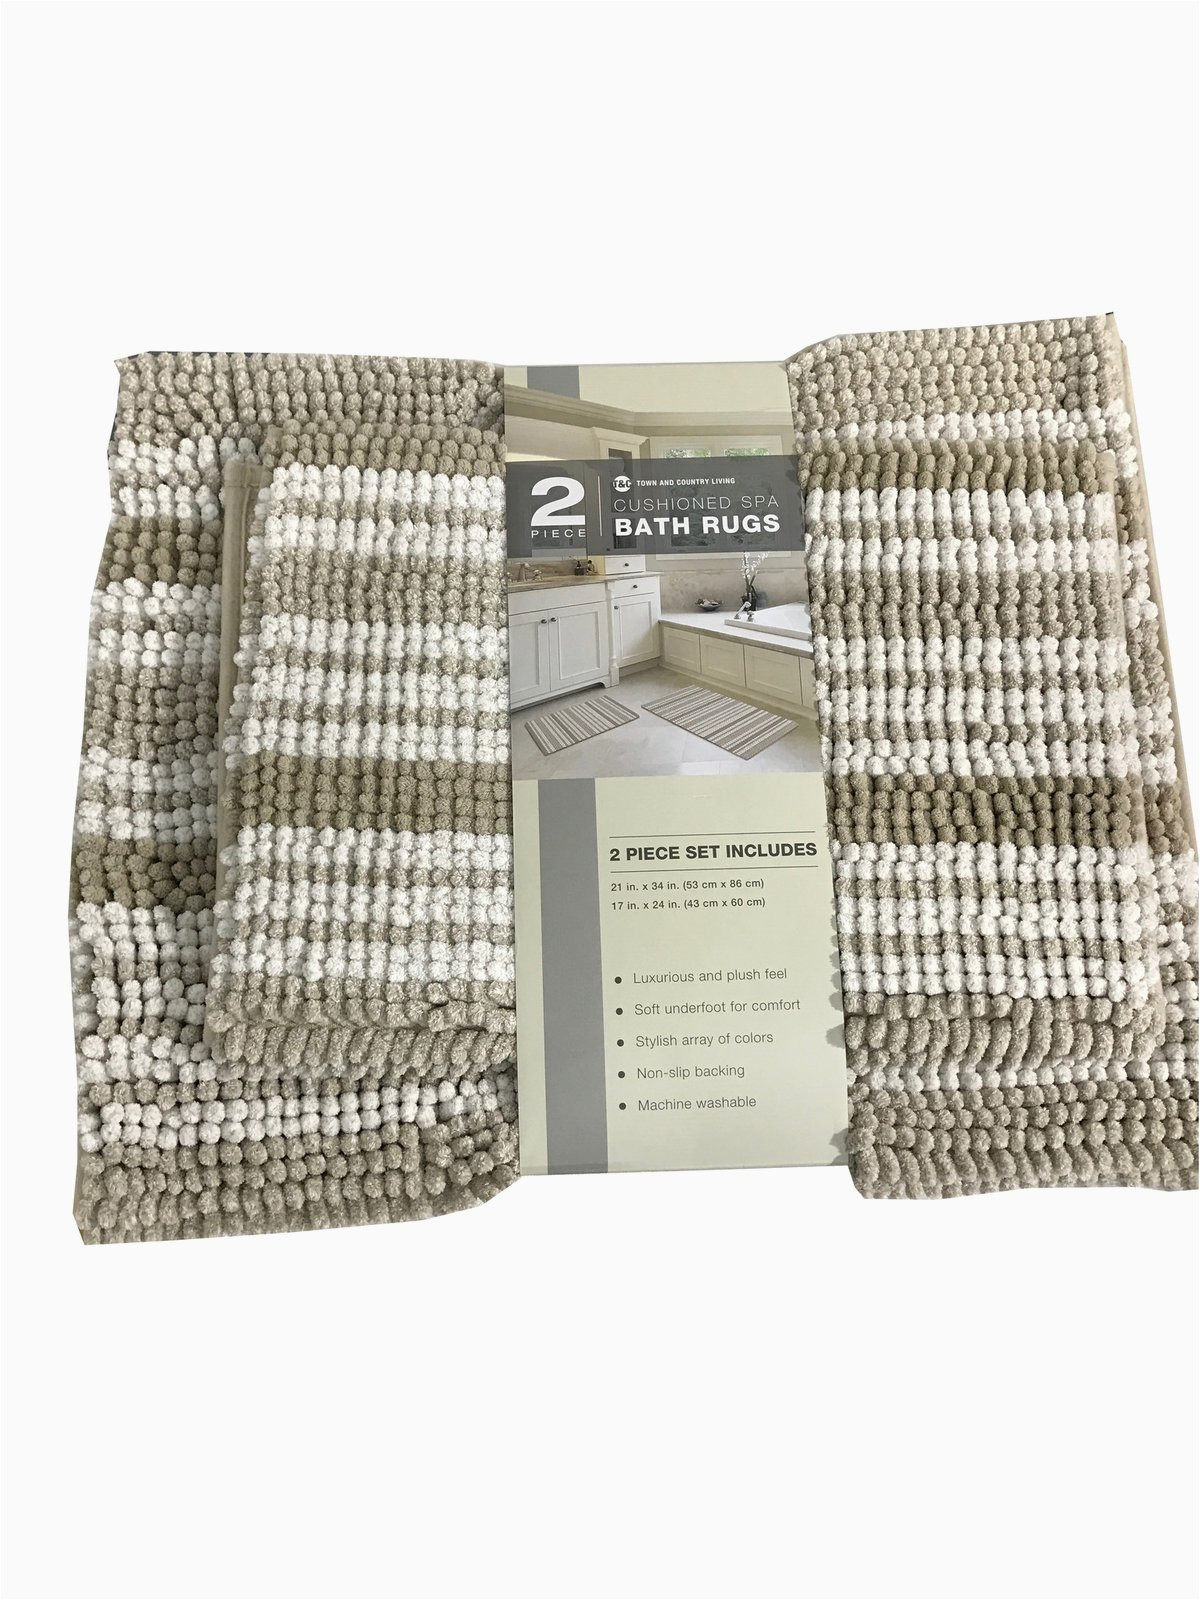 Town and Country Living Cushioned Spa Bath Rugs town Country Living 2 Piece Cushioned Spa Bath Rugs Set 2134 and 1724 In Brown